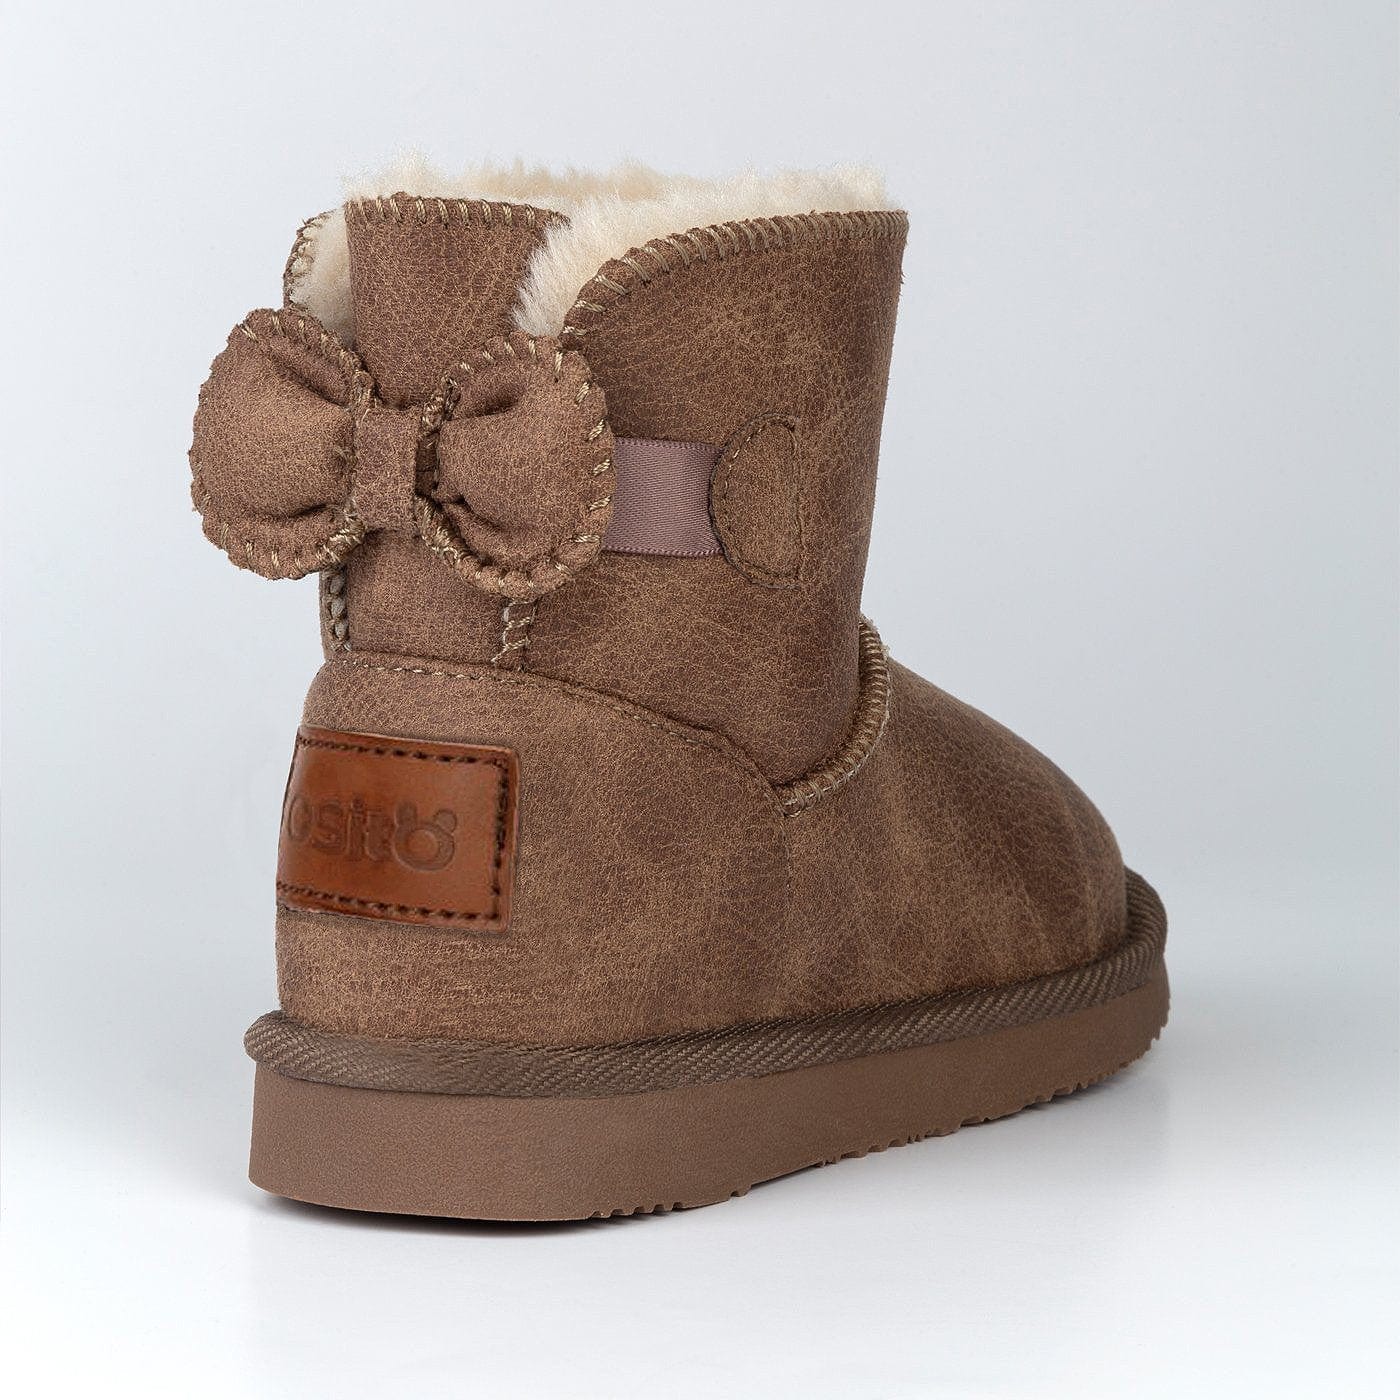 OSITO Shoes Baby's Taupe Bow Australian Boots